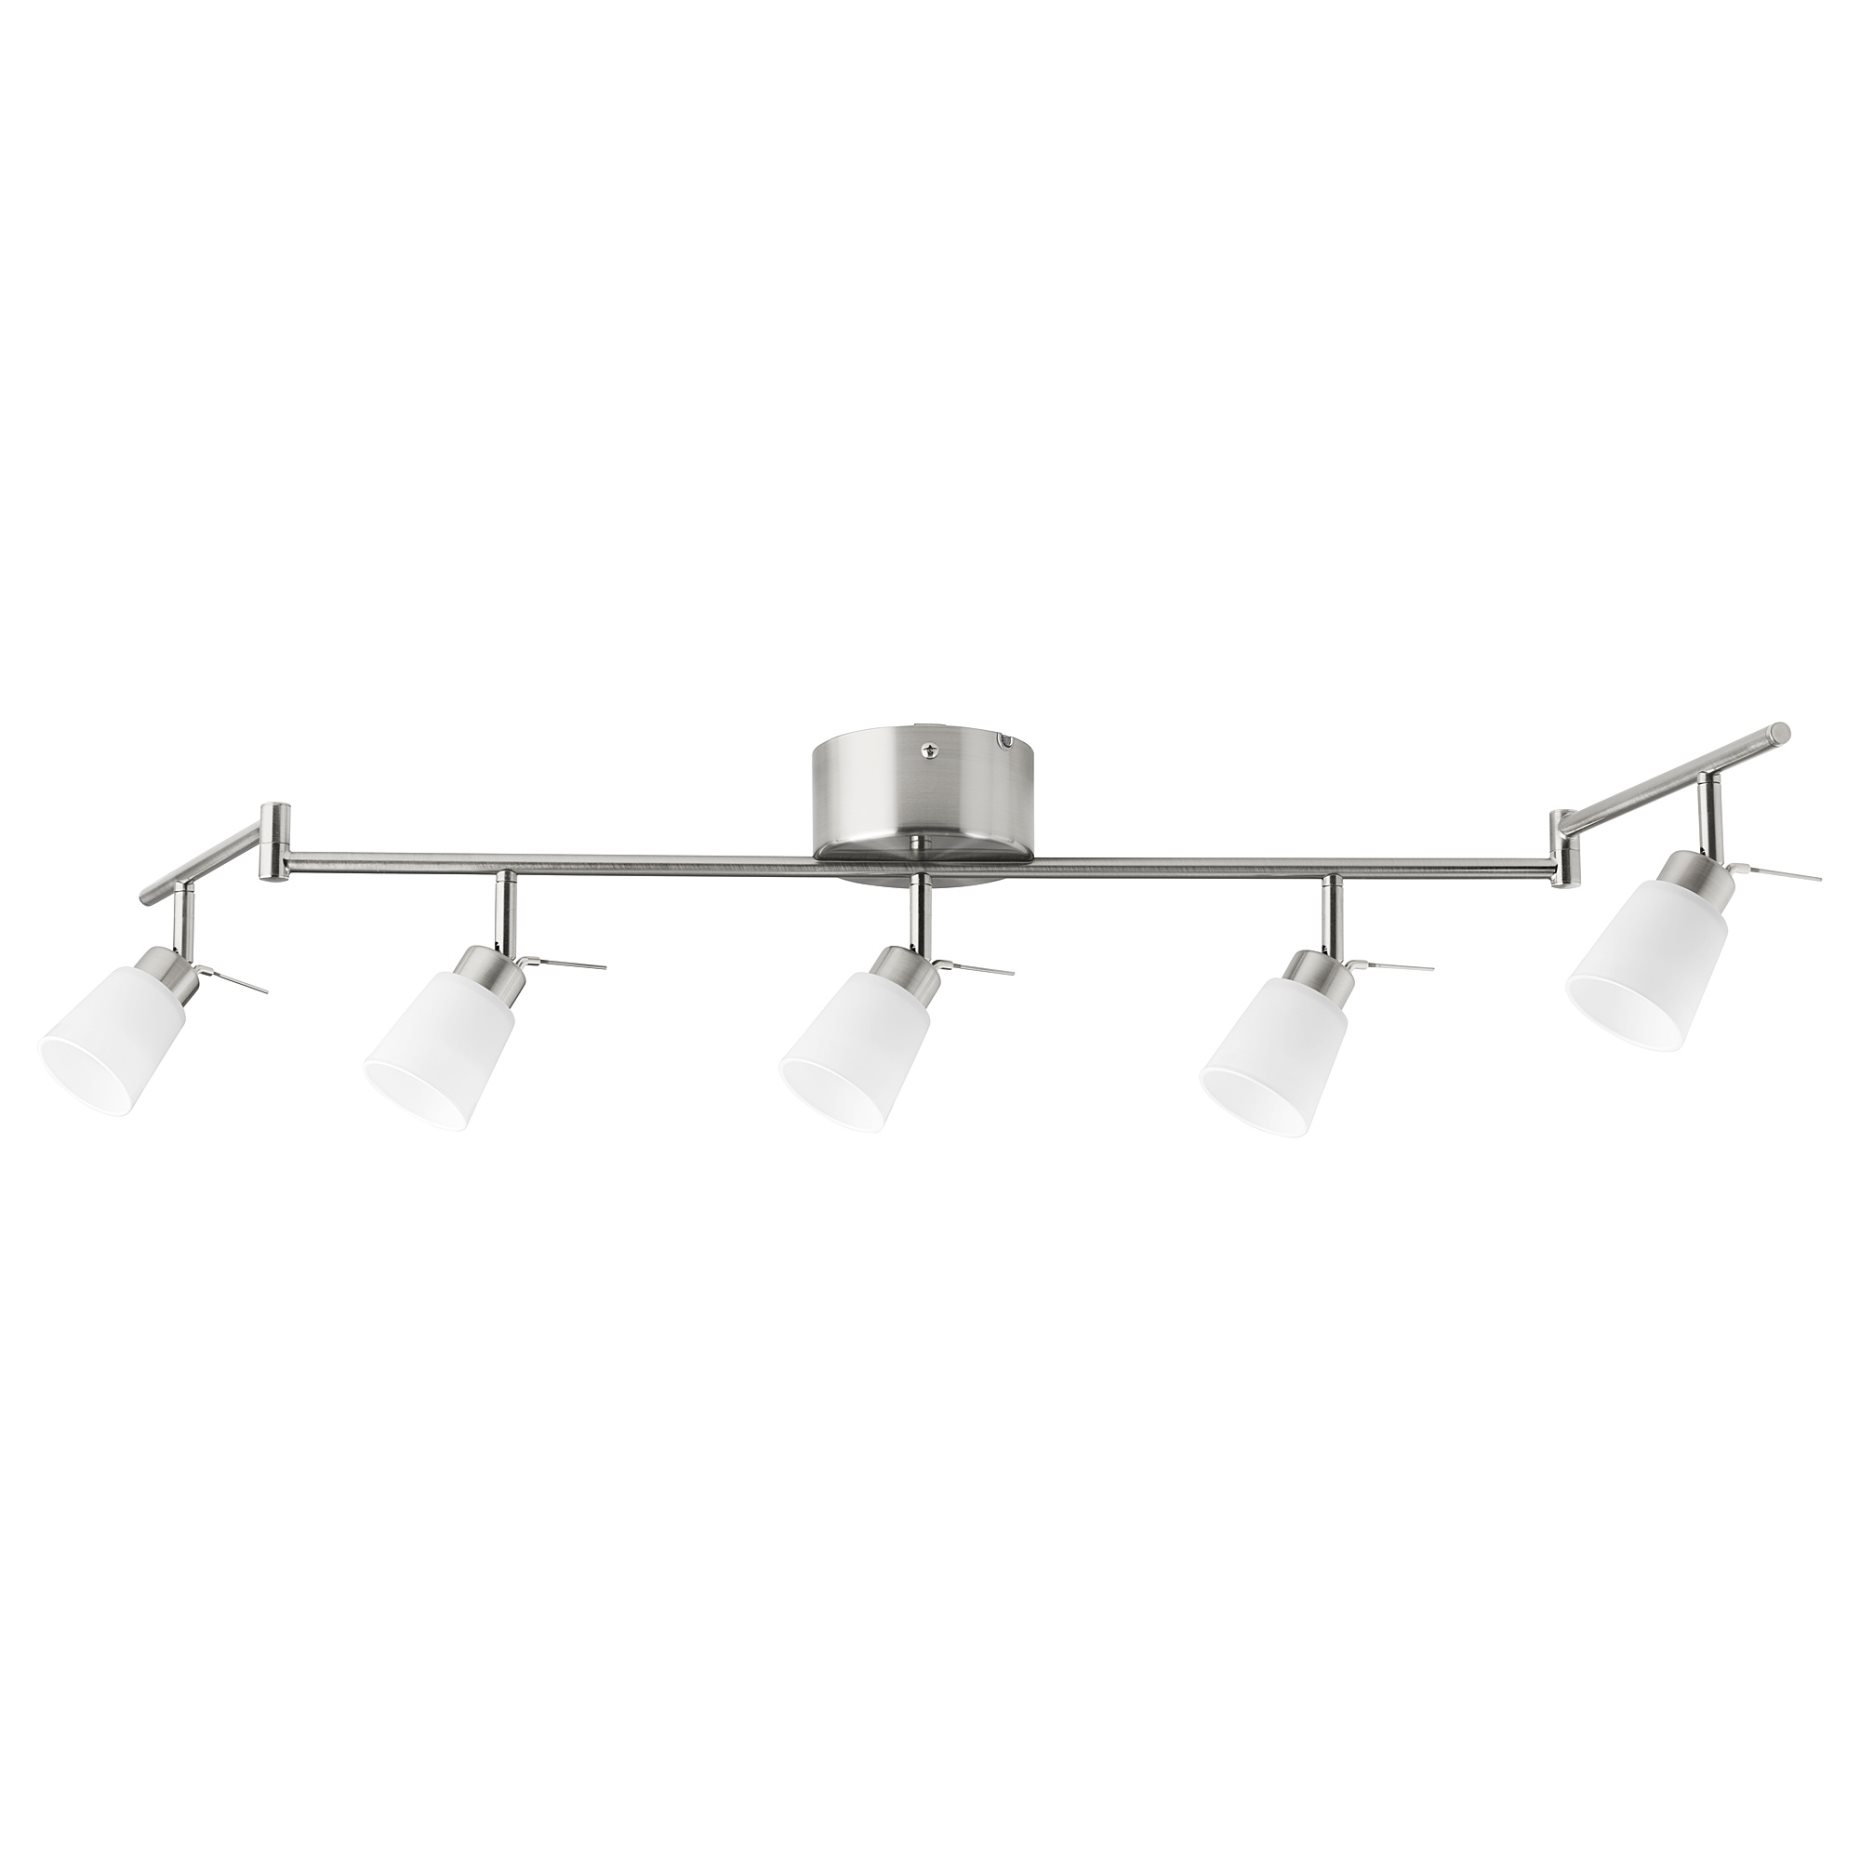 TIDIG, ceiling spotlight with 5 spots, 902.626.53